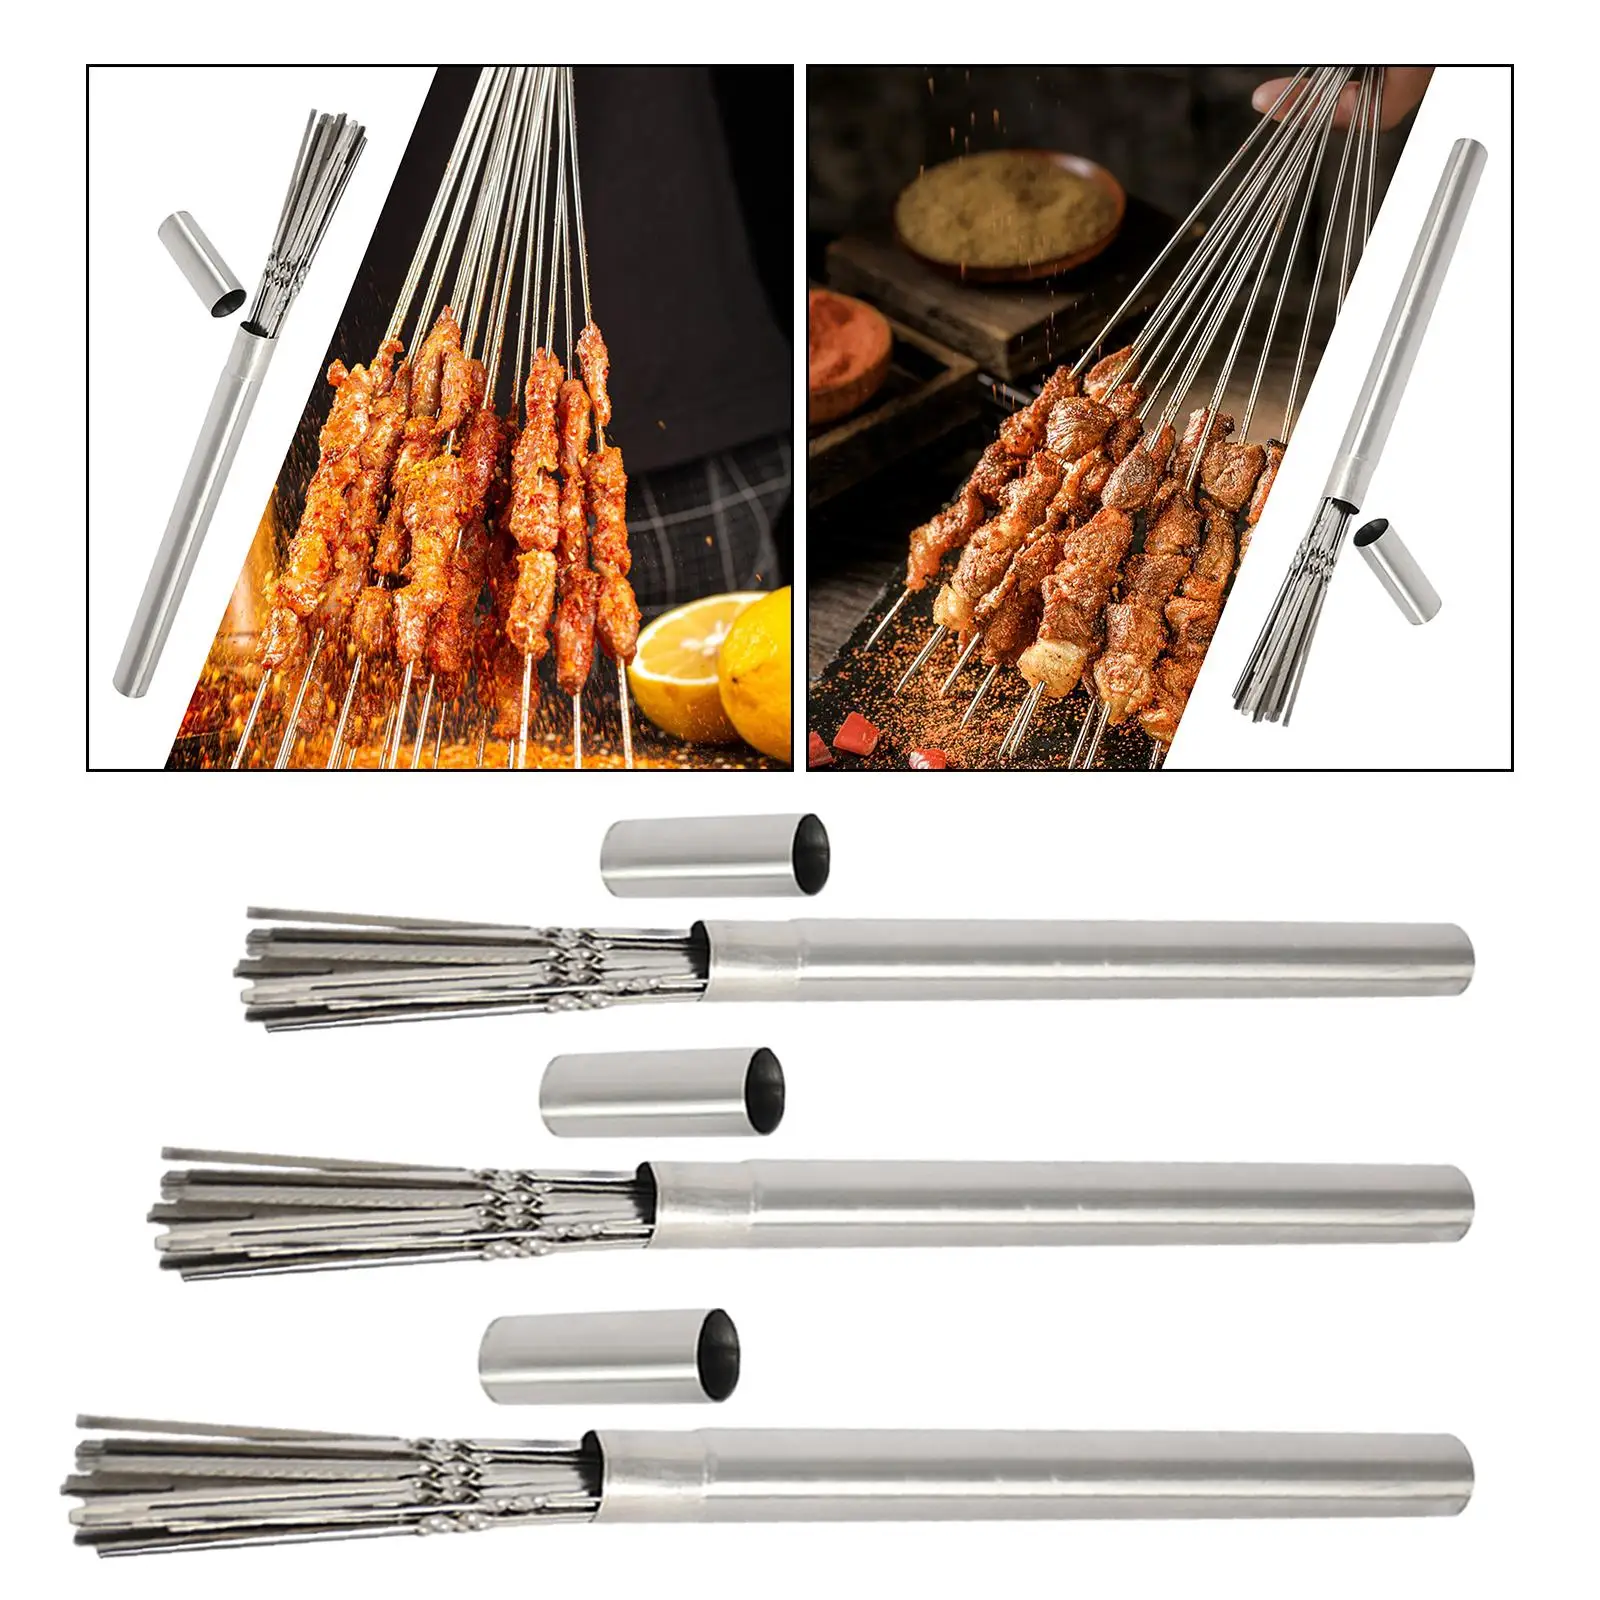 Kebab Skewers 50 Pieces Stainless Steel with Storage Tube Kabob Skewers for Grilling for Grilling Seafood Chicken Vegetables BBQ